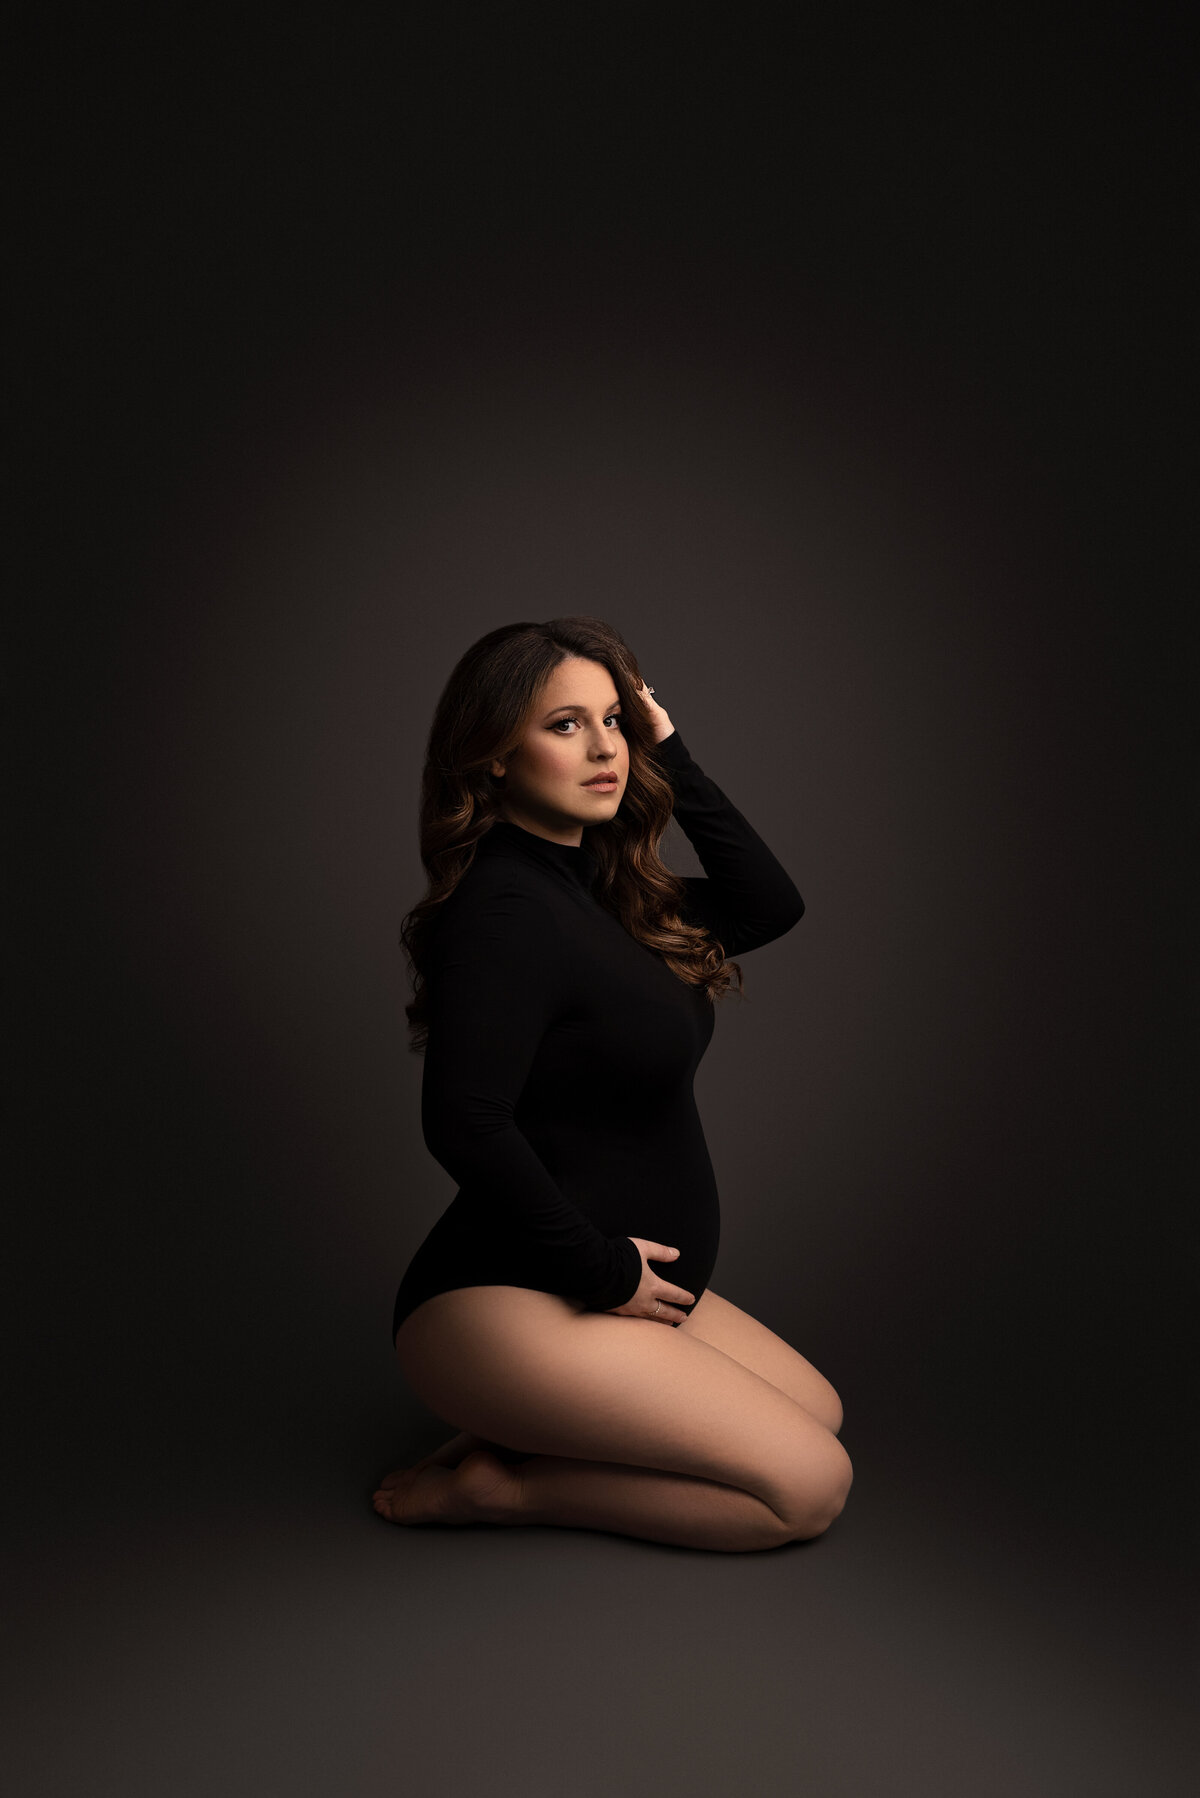 Maternity photo by Katie Marshall, Philadelphia Main Line's premier maternity photographer. Woman in a long-sleeve black bodysuit with bare legs, sitting on her knees, angled away from the camera. Her forearm supports her baby bump, while her back hand brushes hair off her face. Her head is gently tilted toward the camera, set against a grey backdrop, creating an intimate and artistic composition.